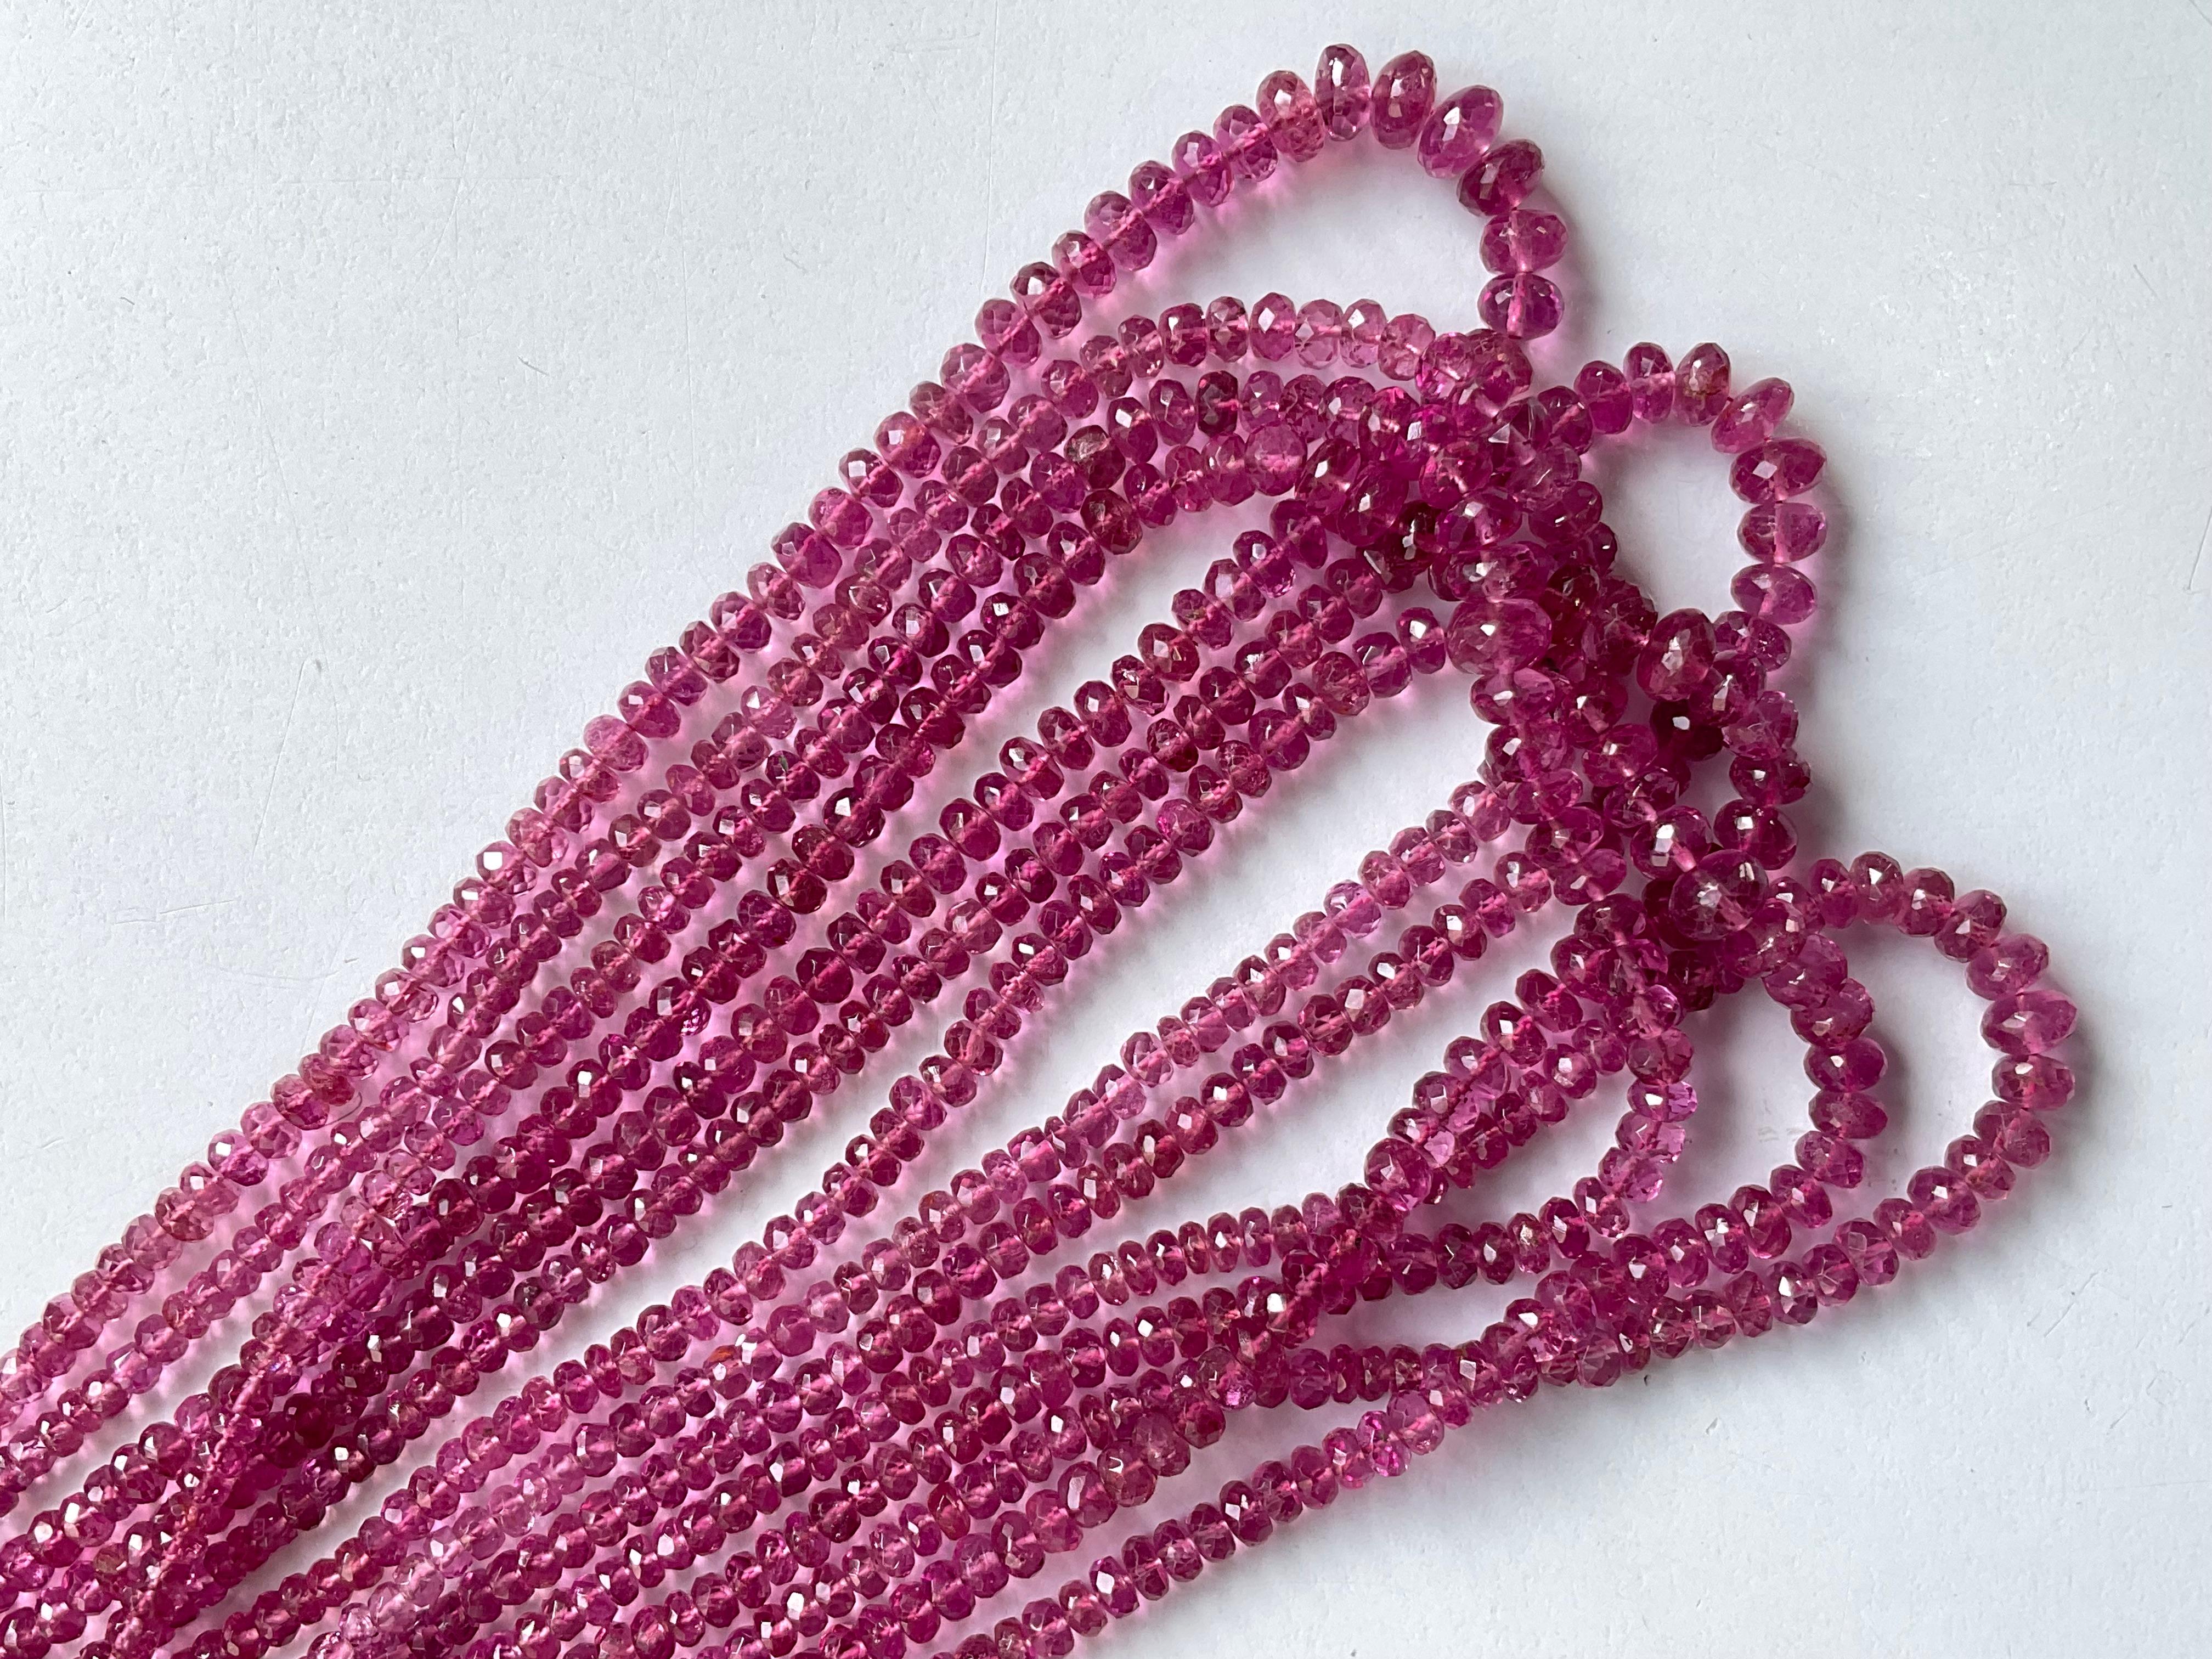 Women's or Men's 346.25 Carats Pink Tourmaline Beads Top Fine Quality For Jewelry Natural Gem For Sale